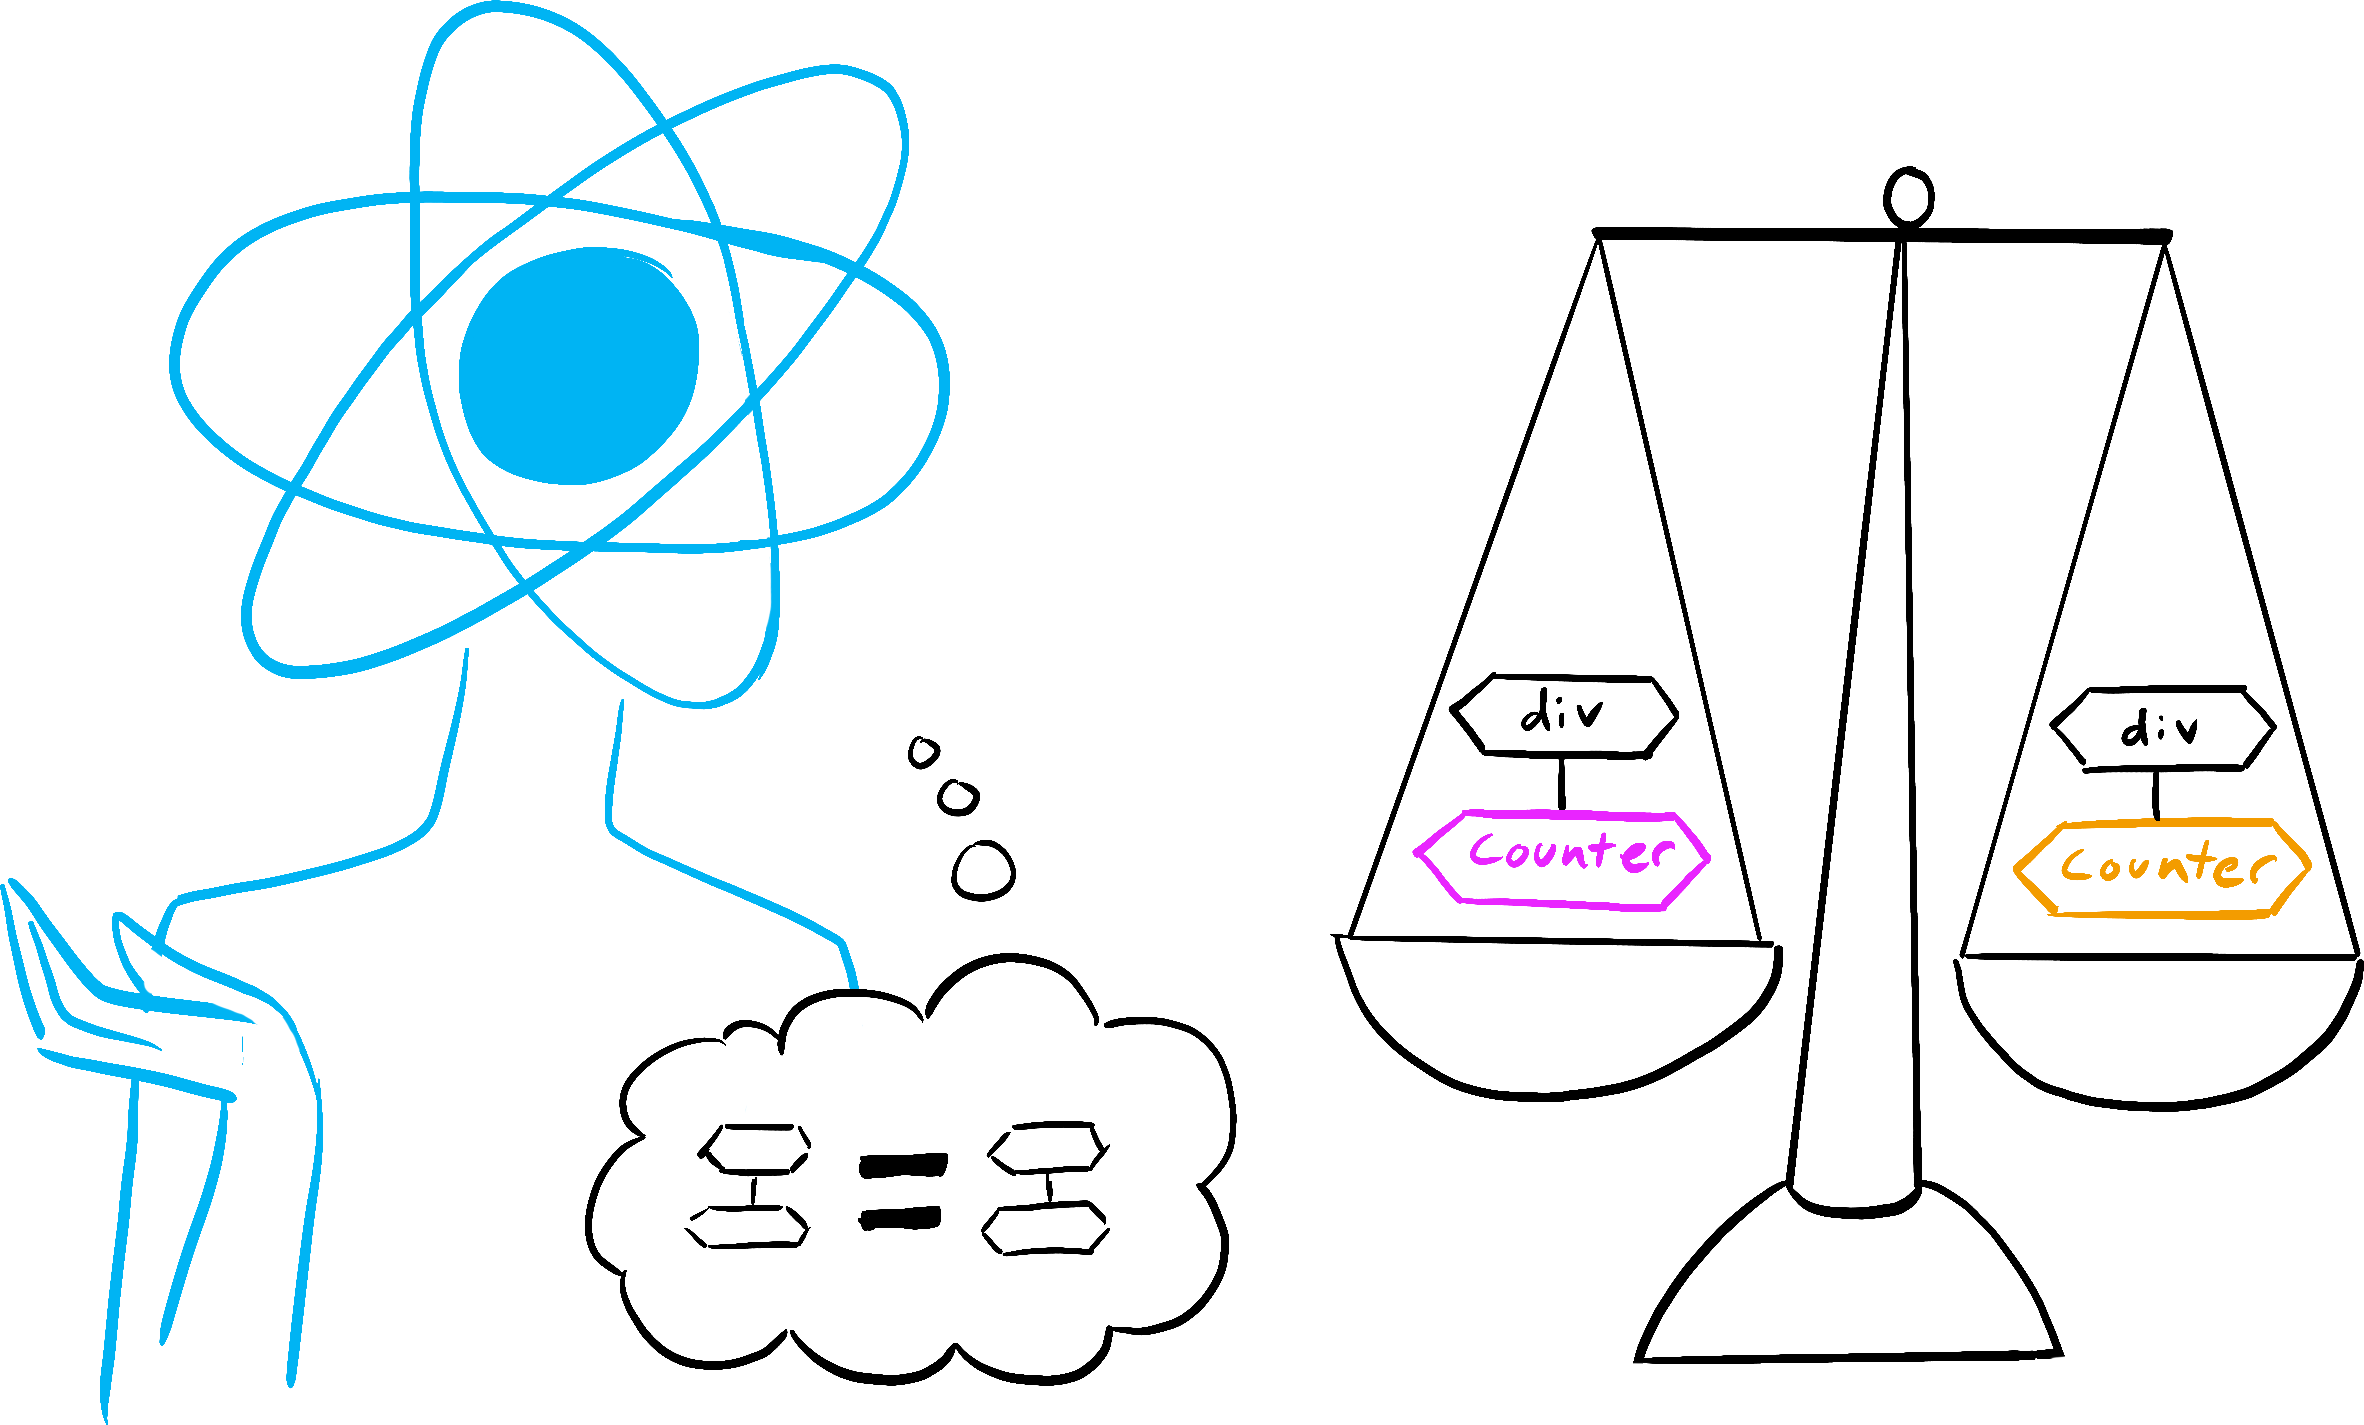 React weighs both components, and although they are different colors, it sees them as the same.